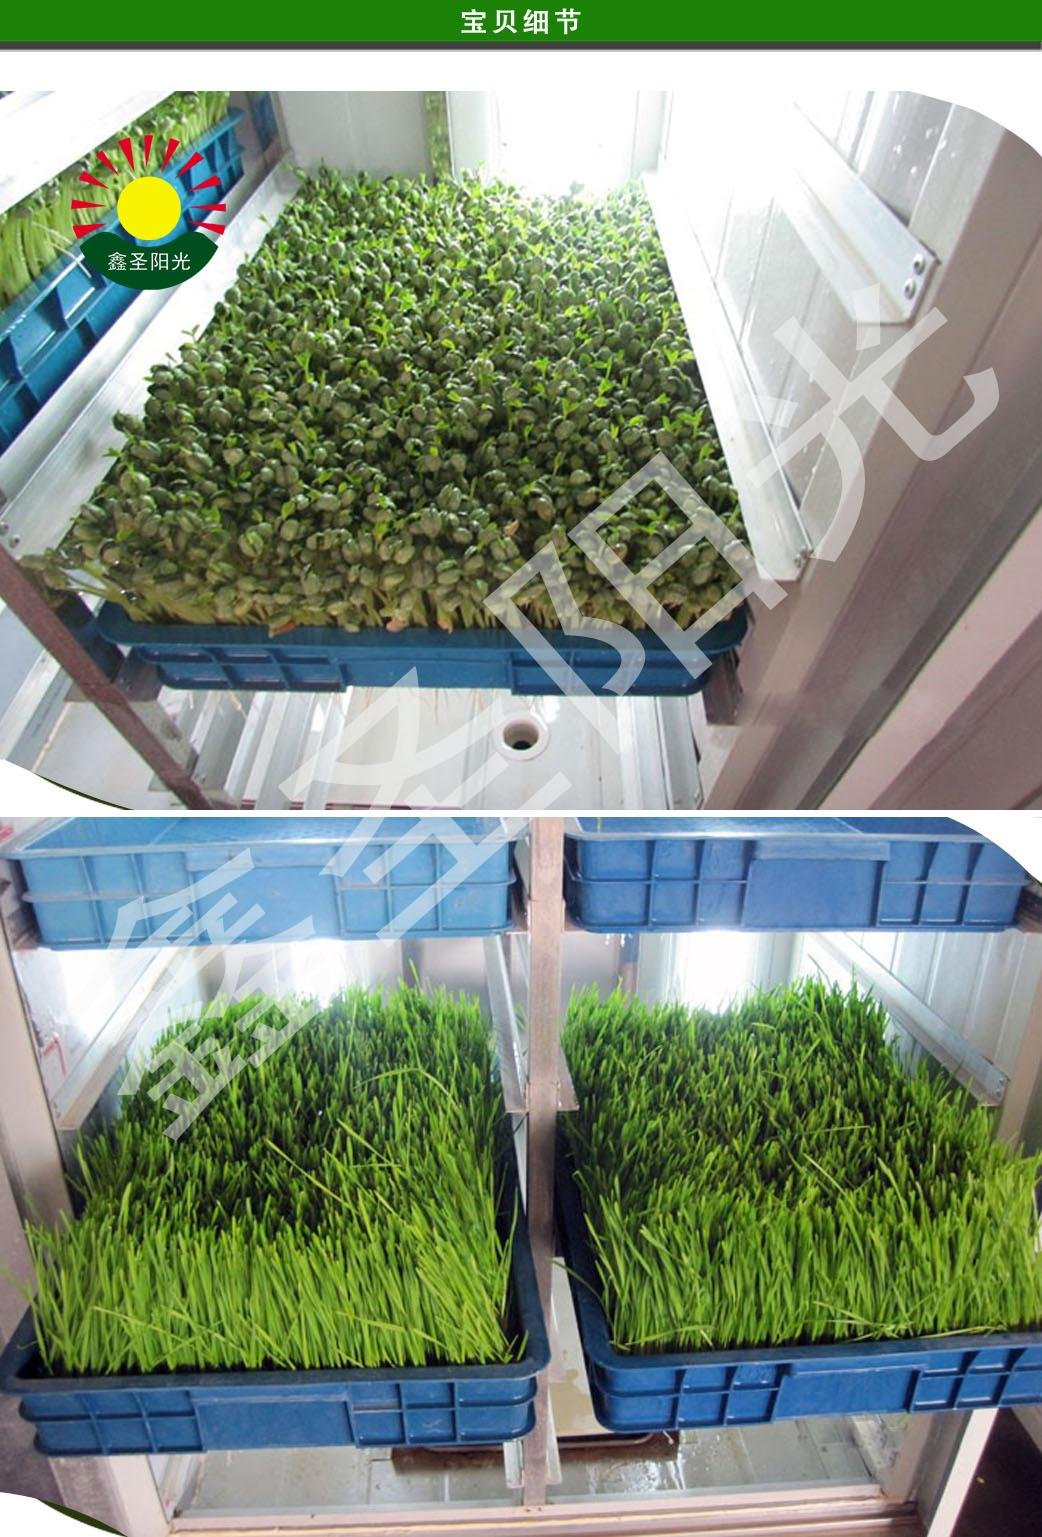 Full automatic multifunctional machine sprouts seedling machine special offer 3